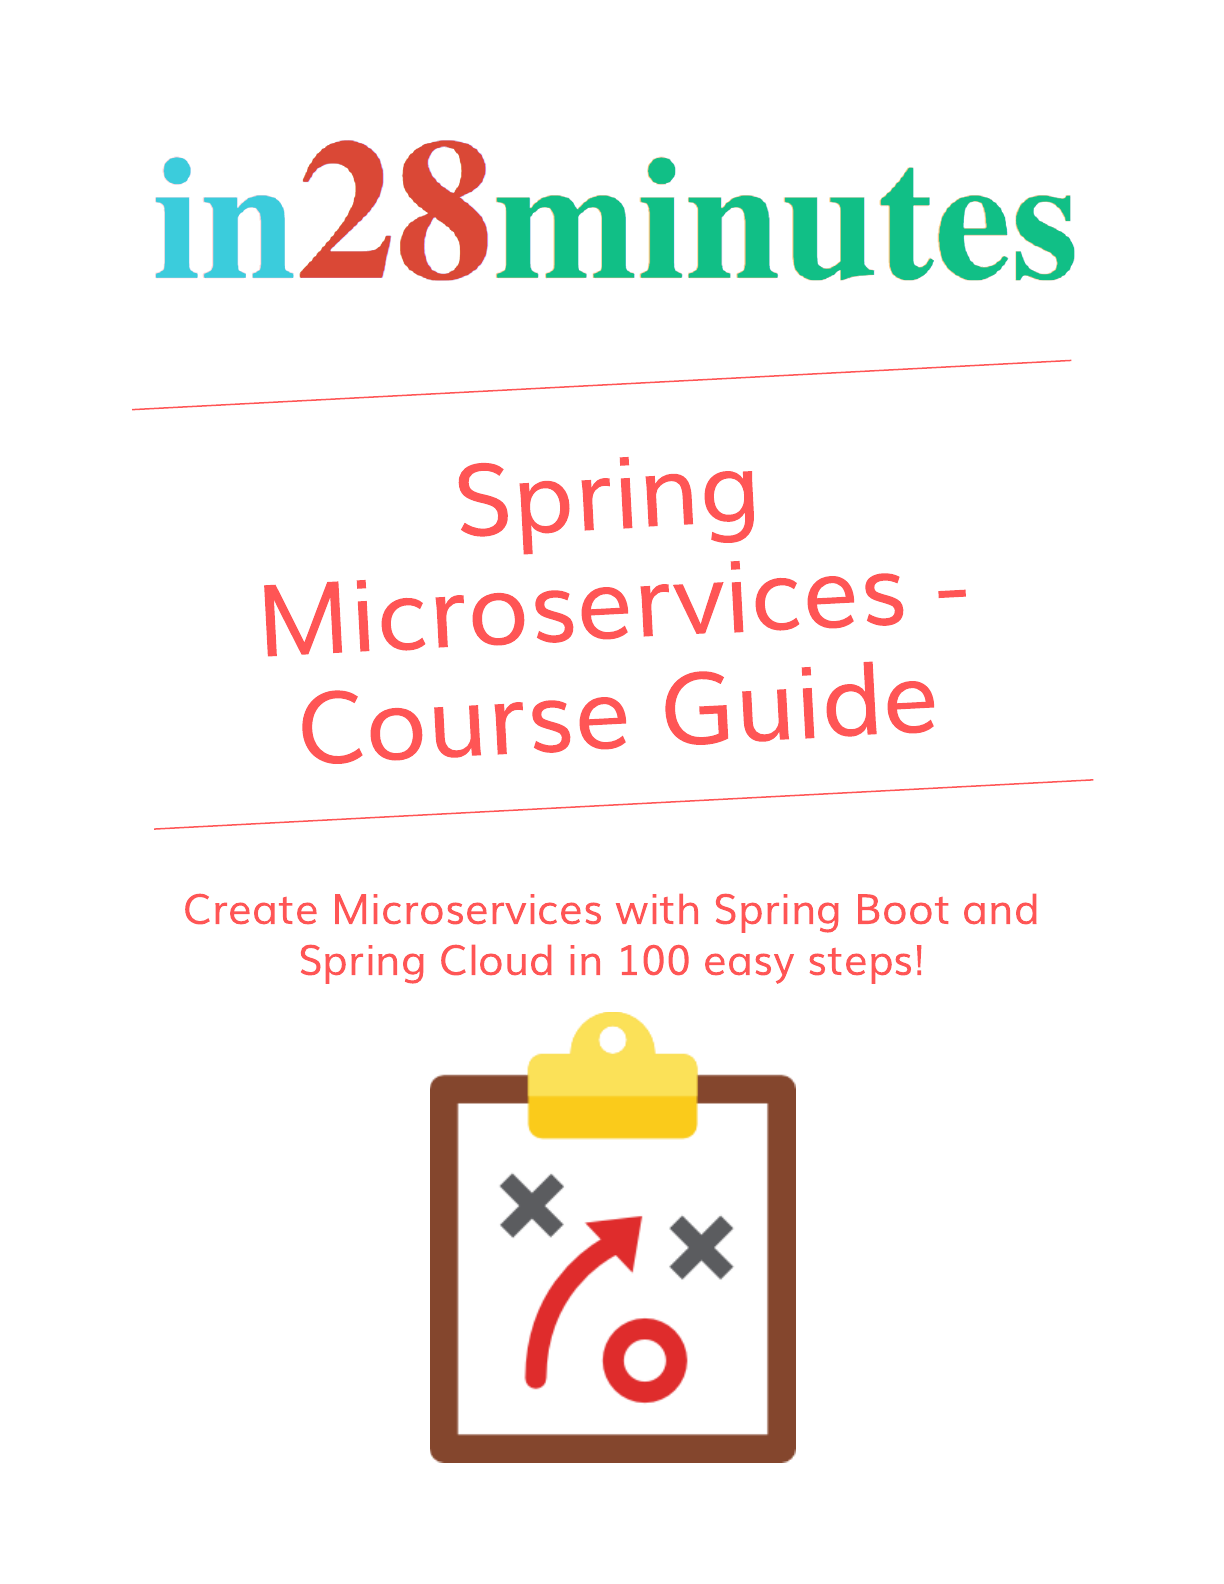 in 28 minutes spring boot